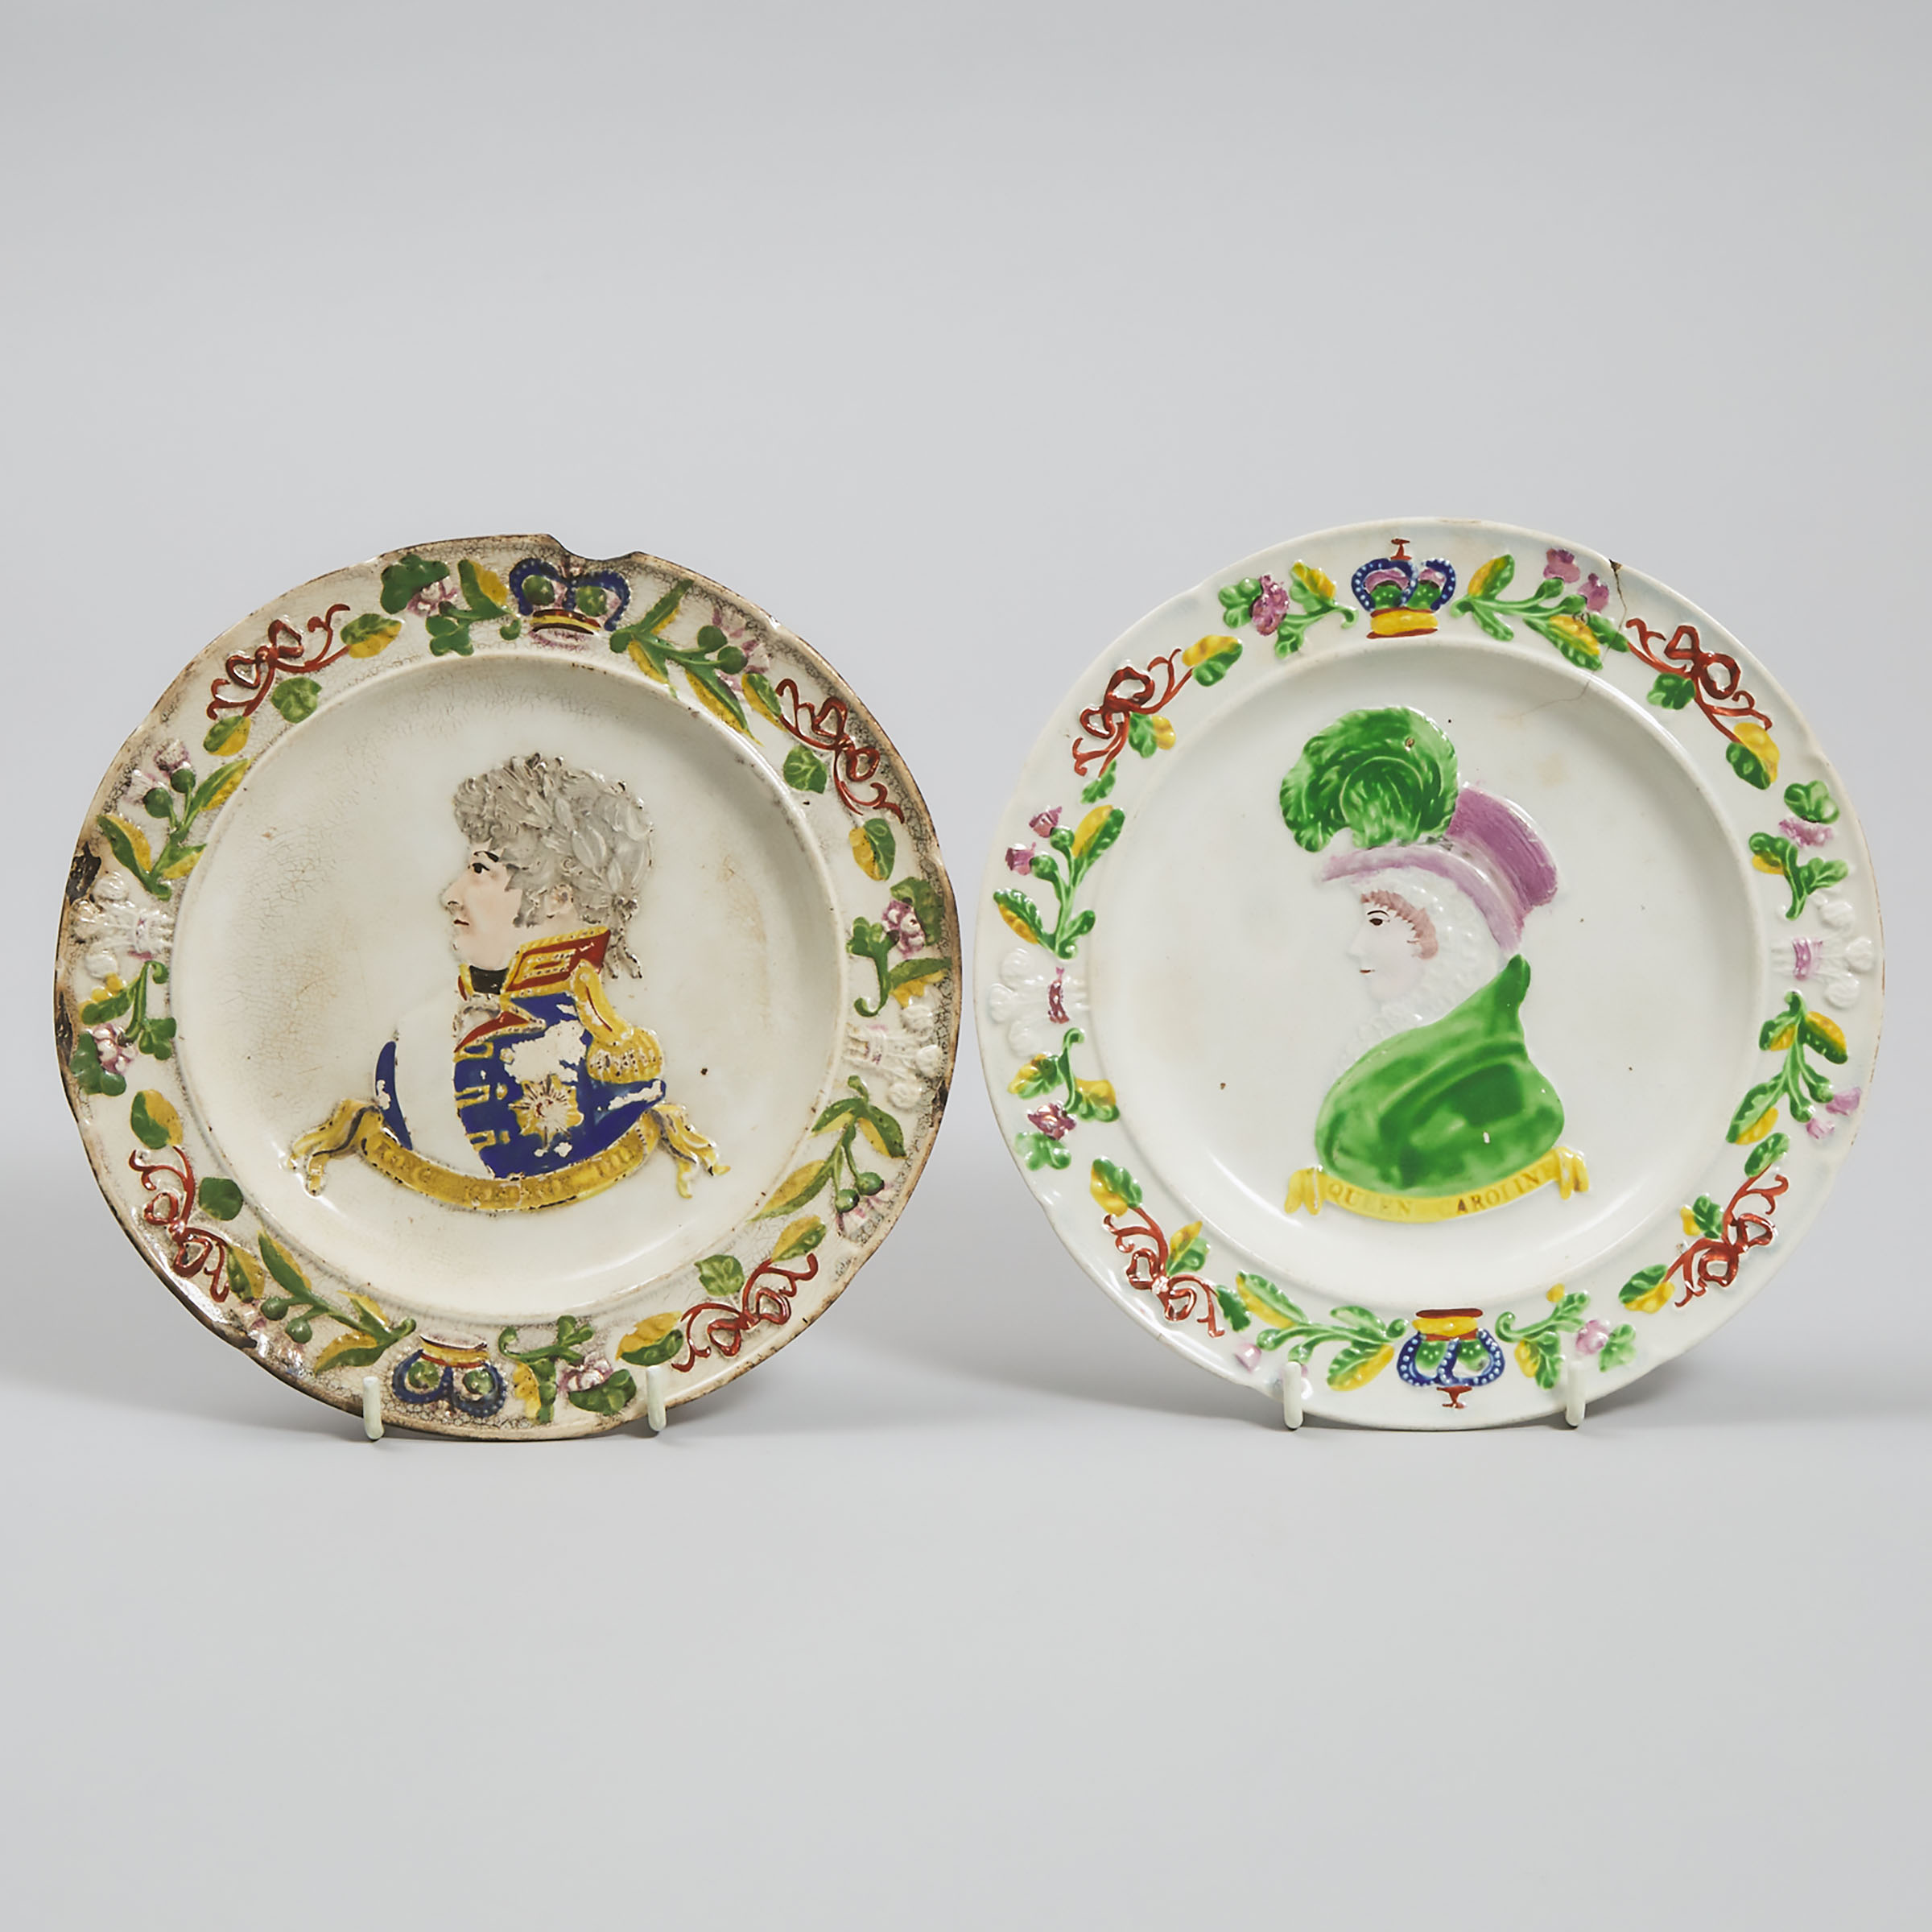 Pair of Pearlware Plates Commemorating the Coronation of King George IV and Queen Caroline, c.1821